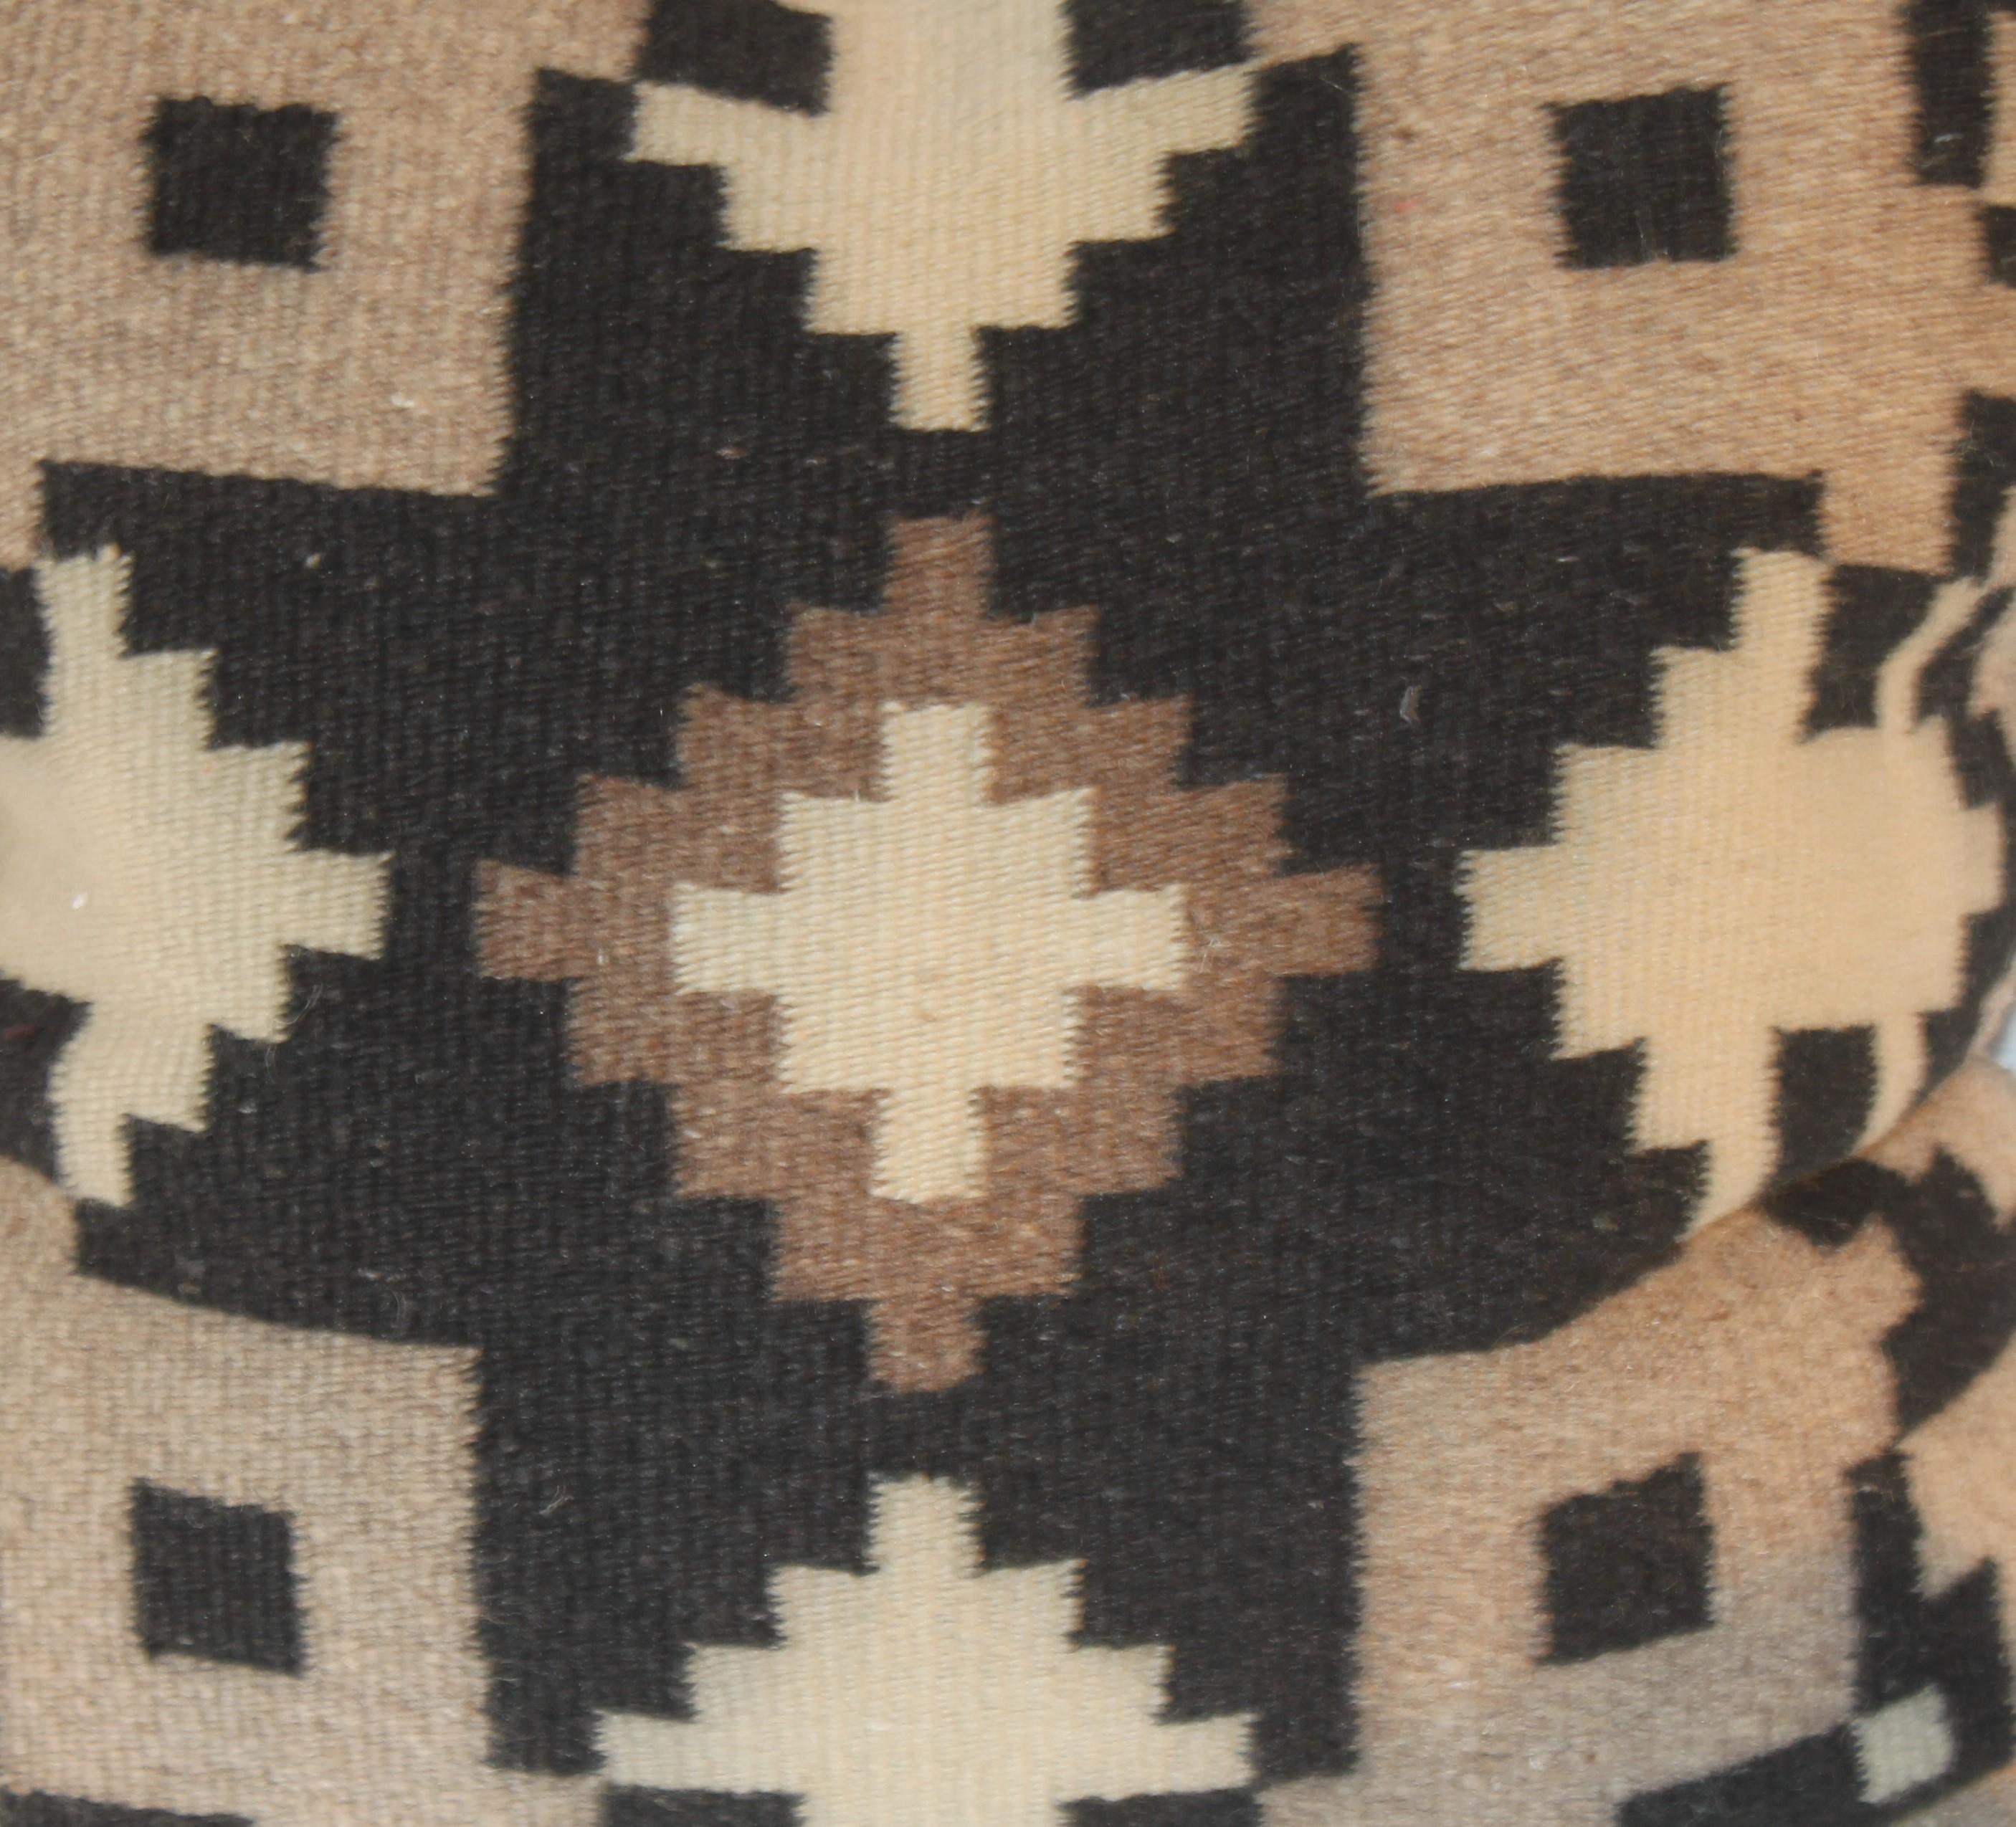 Hand-Crafted Mexican / American Indian Weaving Pillow